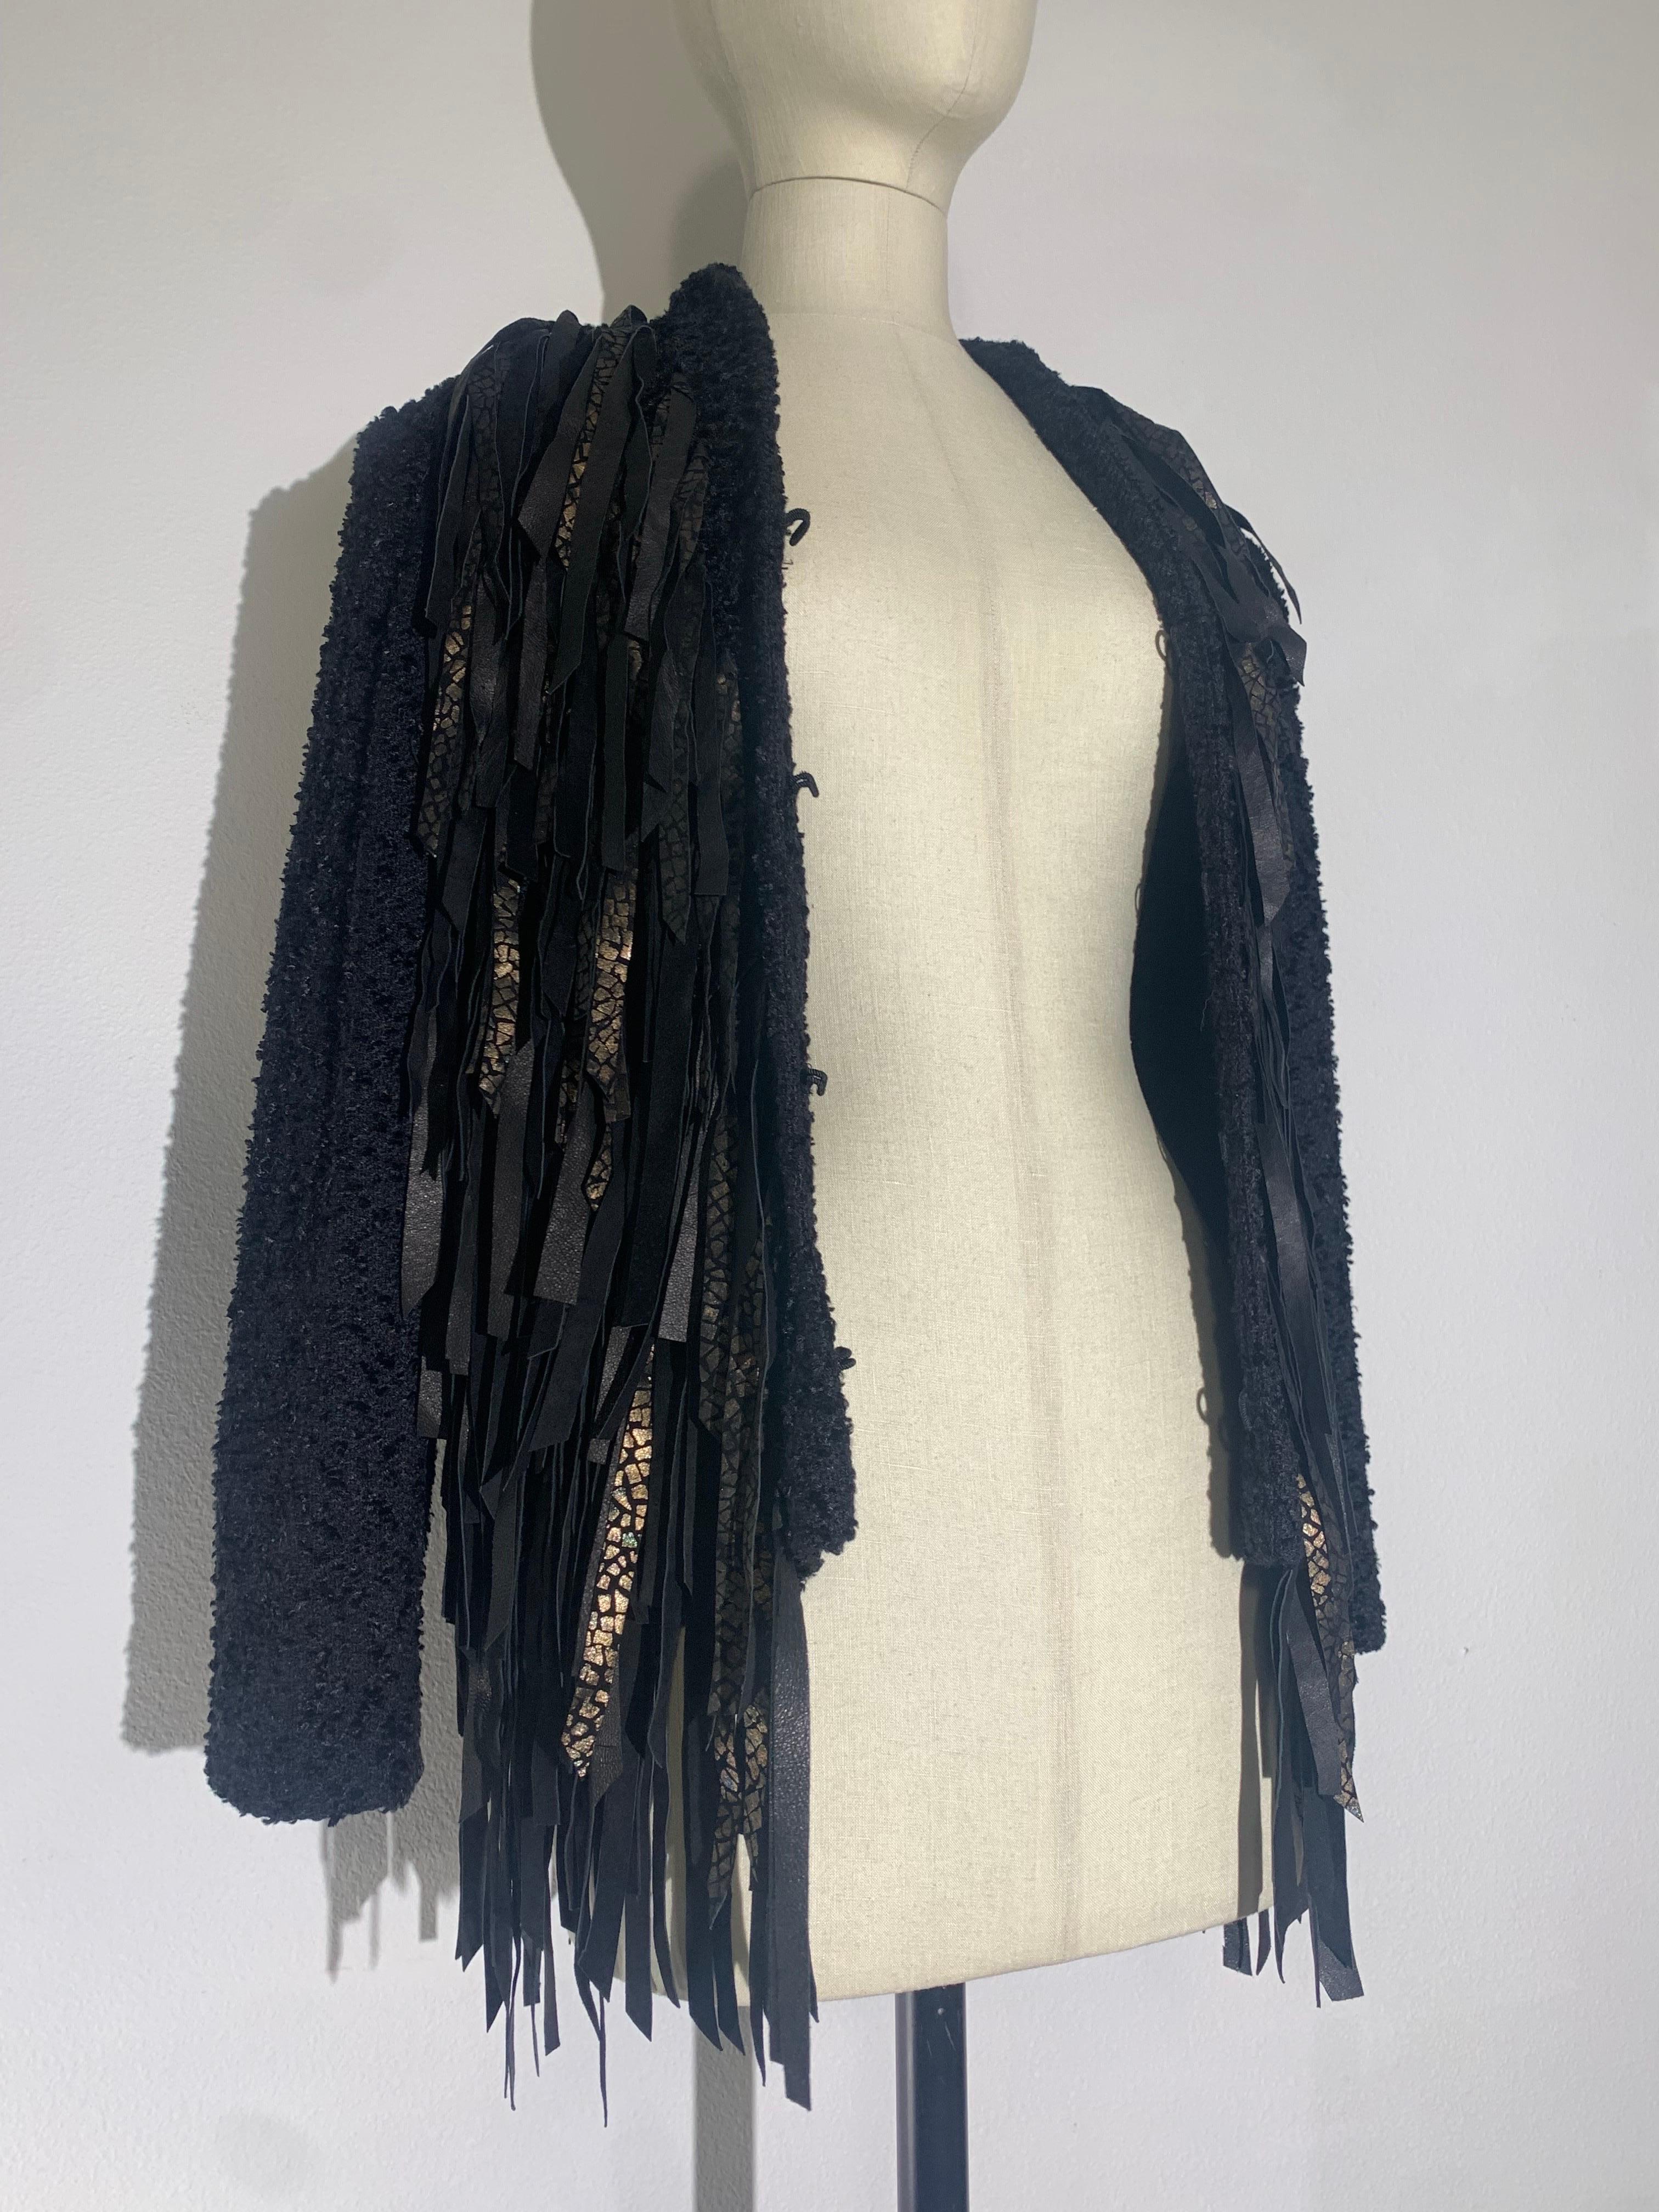 Western-Inspired Art-To-Wear Handwoven Black Boucle & Suede Fringed Jacket  For Sale 5